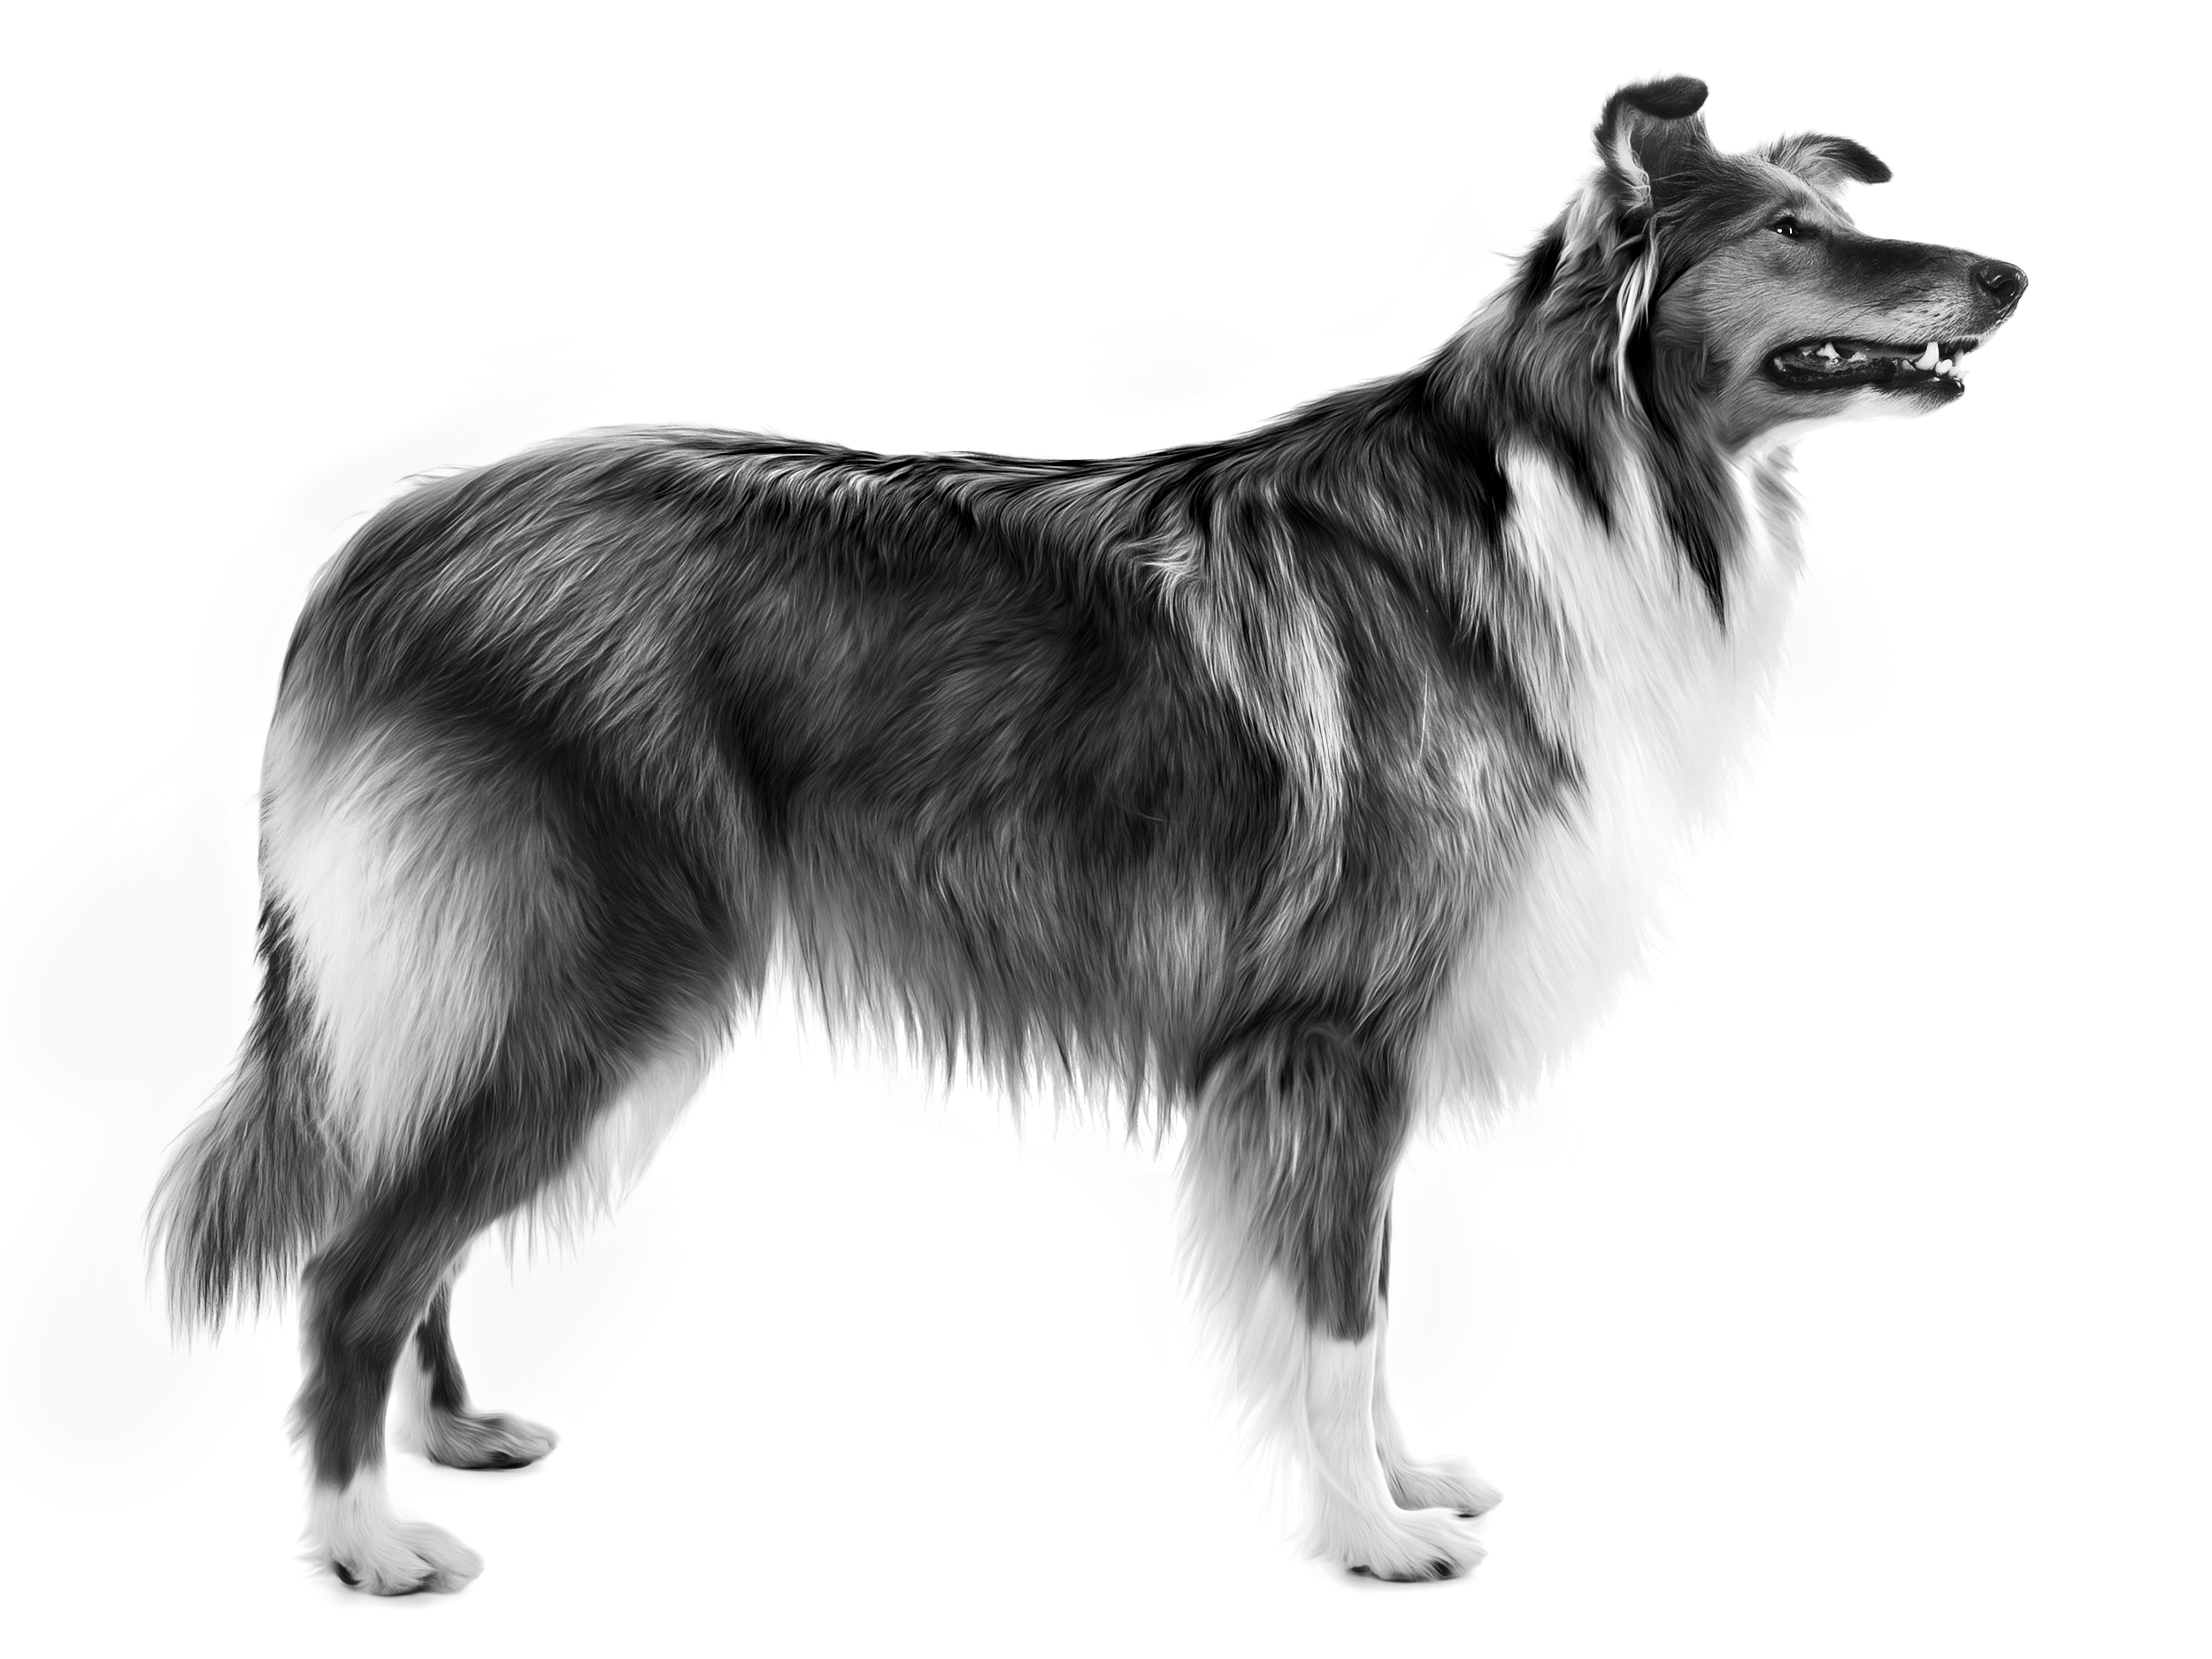 collie rough adult standing black and white